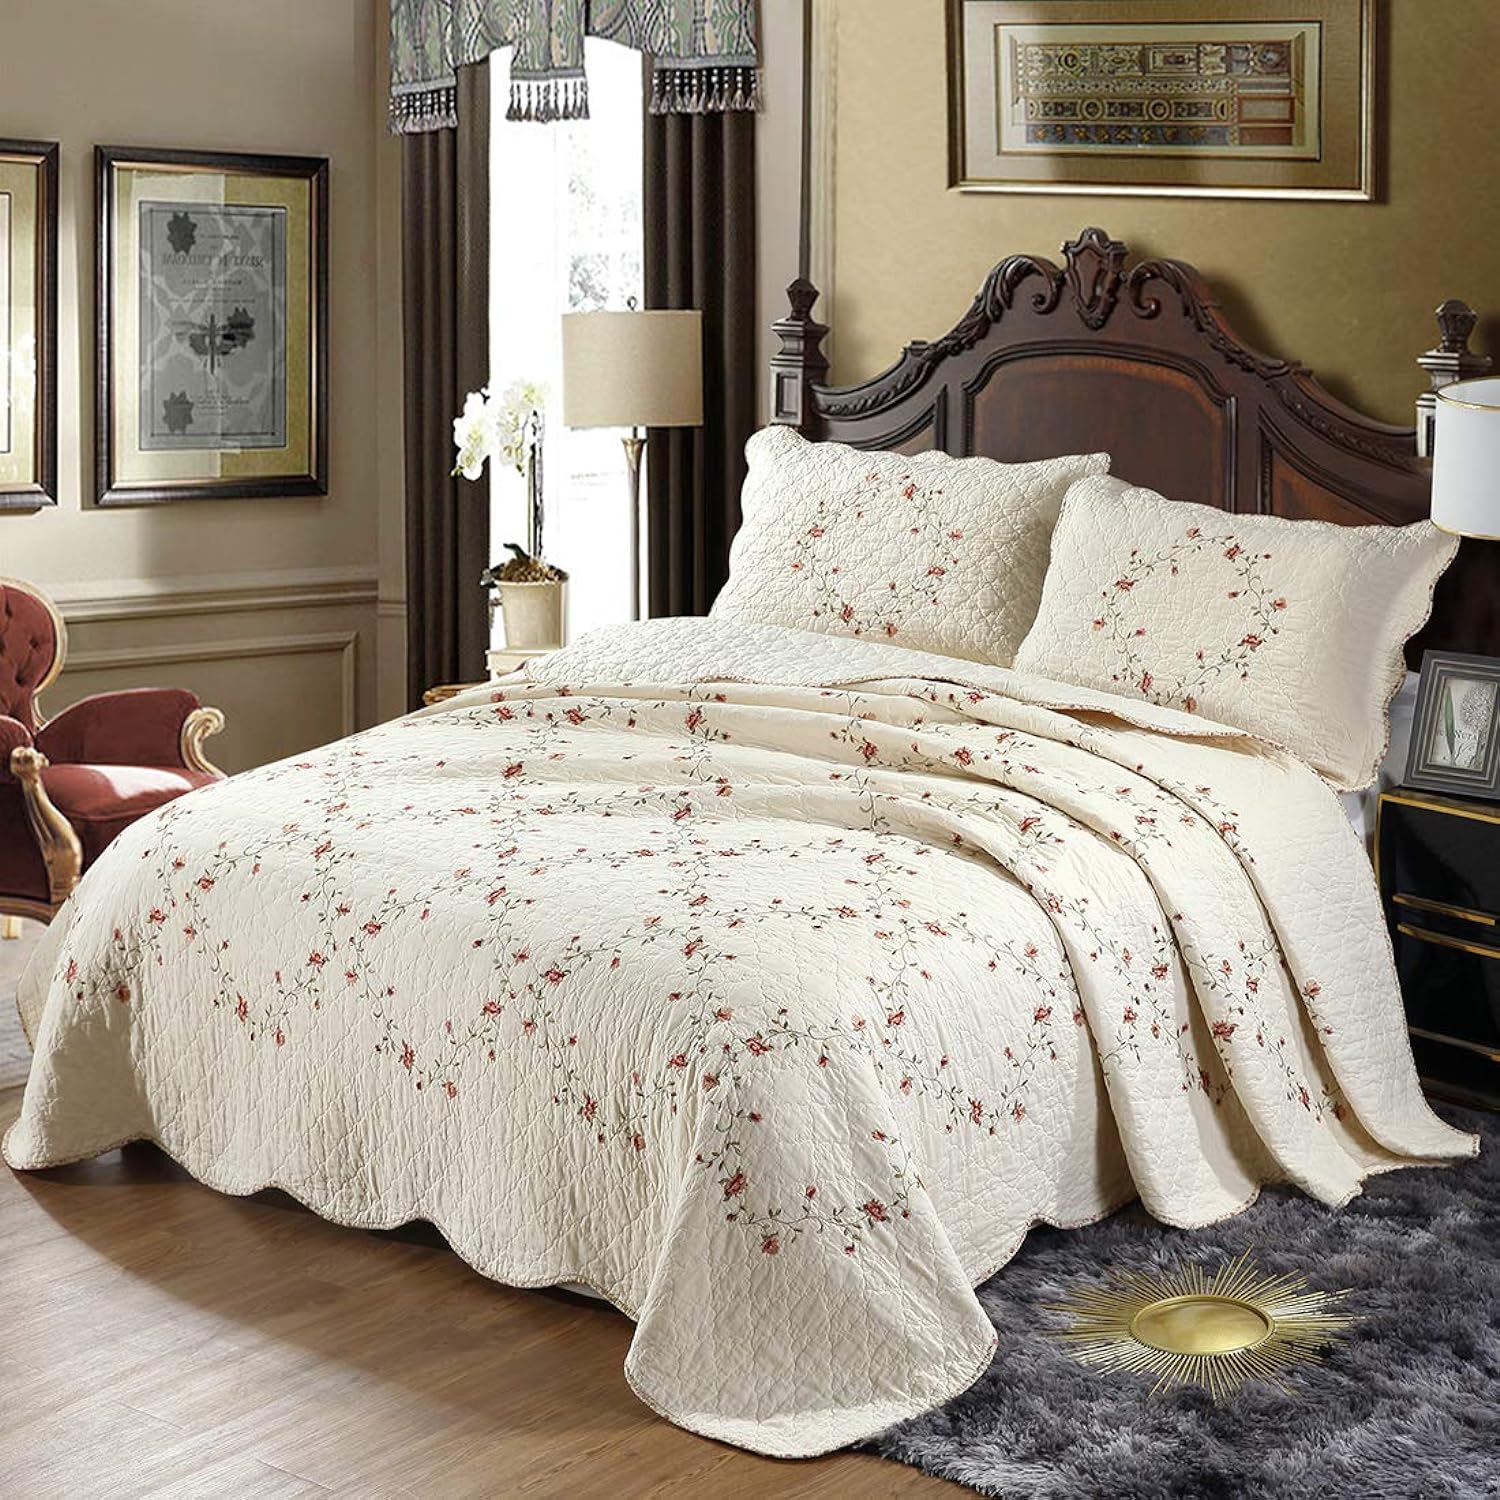 TKM Home 3-Piece Elegant Floral Embroidered Bedspread Coverlet Set Oversize Queen 100% Cotton Reversible Patchwork 1 Quilt An?